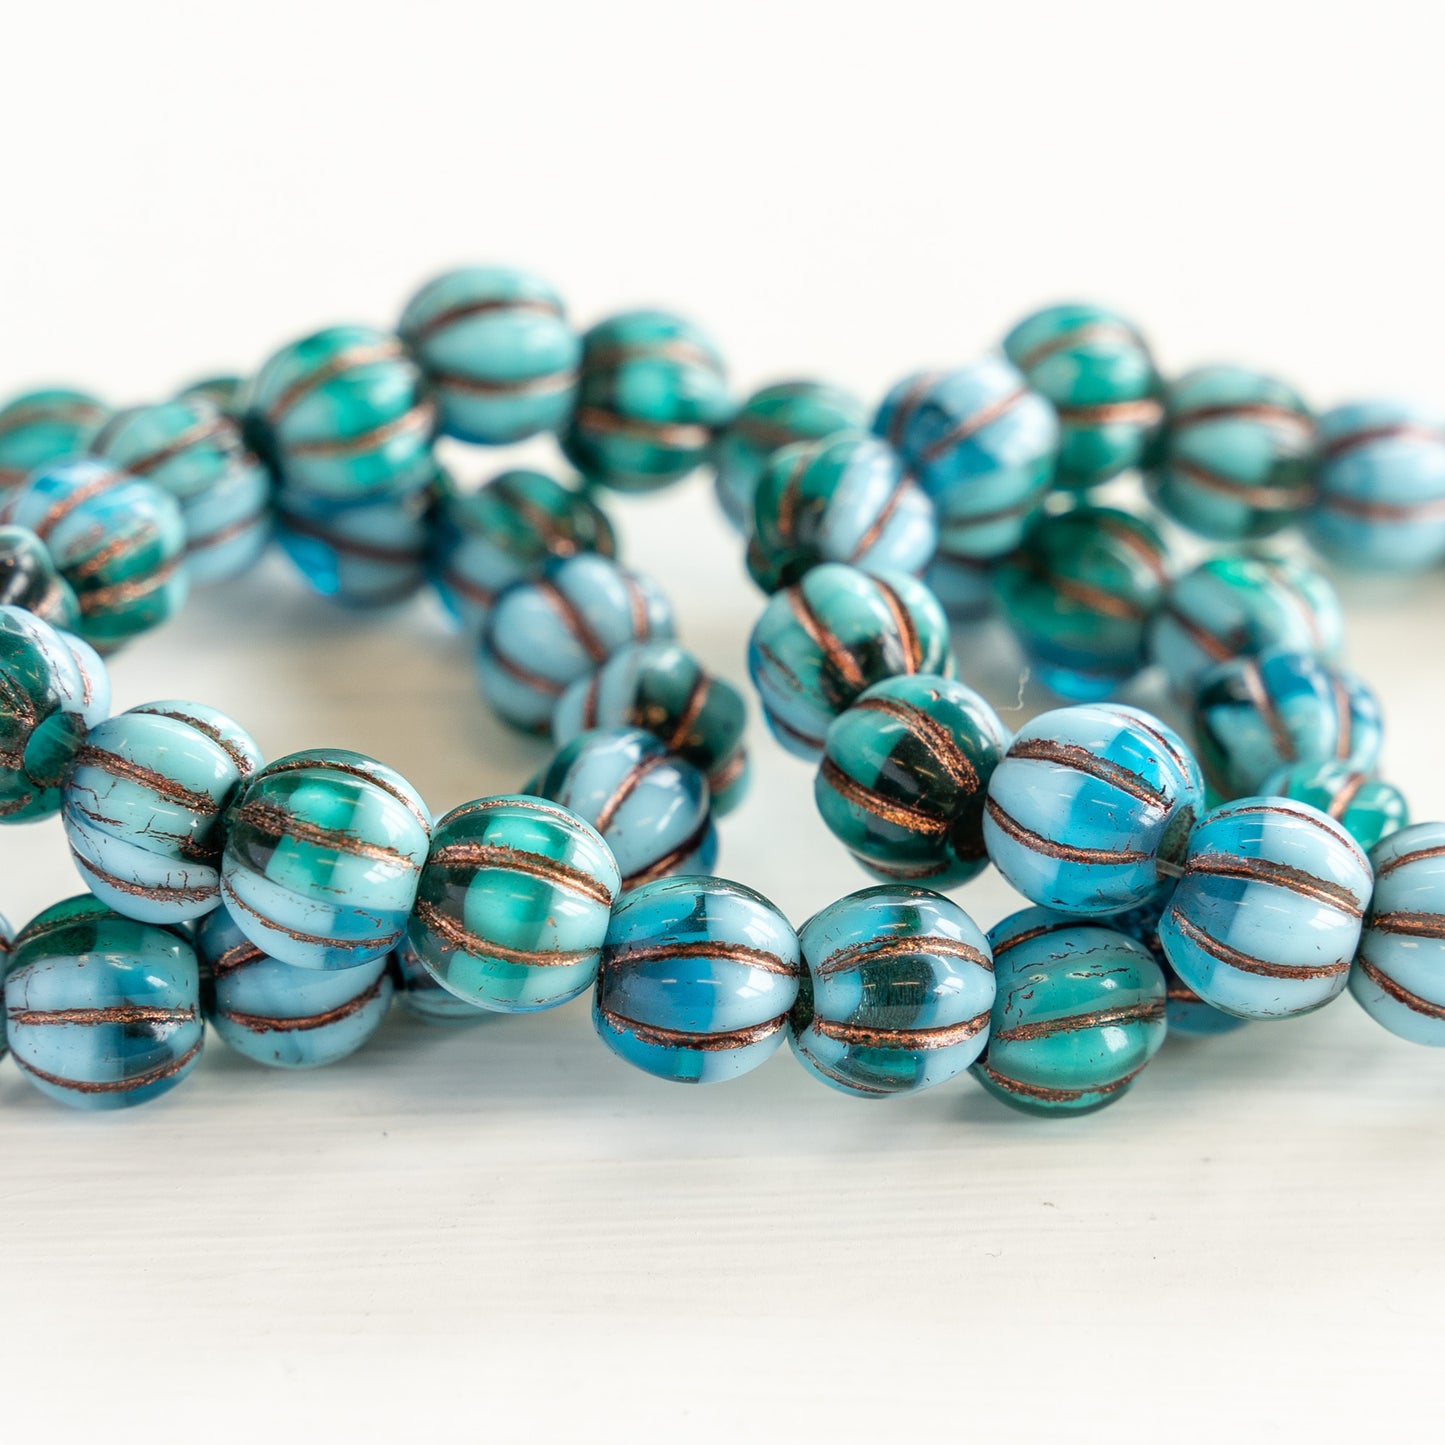 8mm Melon Beads - Green Blue Mix with Bronze Wash - 20 Beads